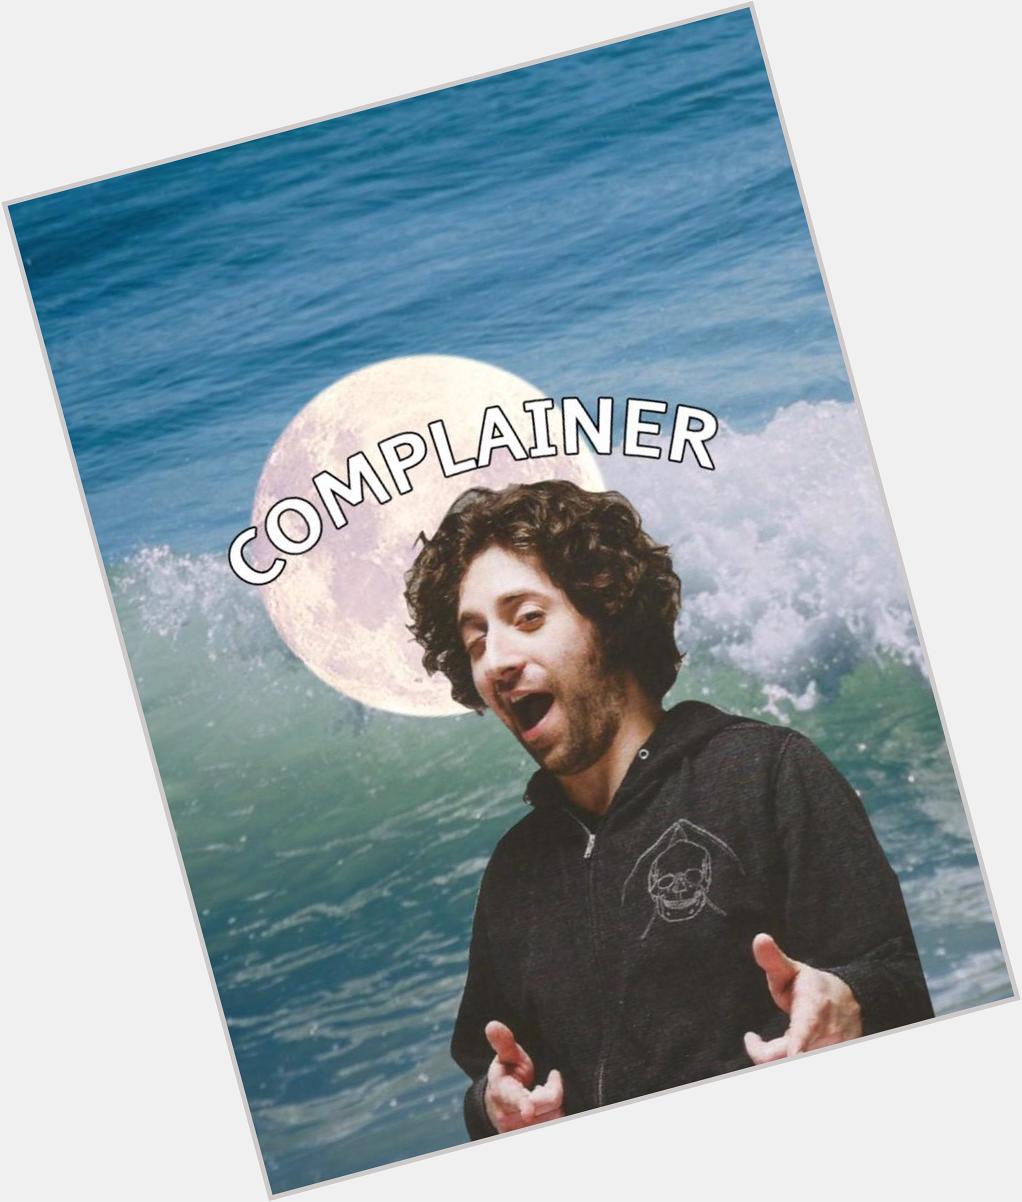 Joe Trohman (happy birthday to the biggest complainer in the band) 